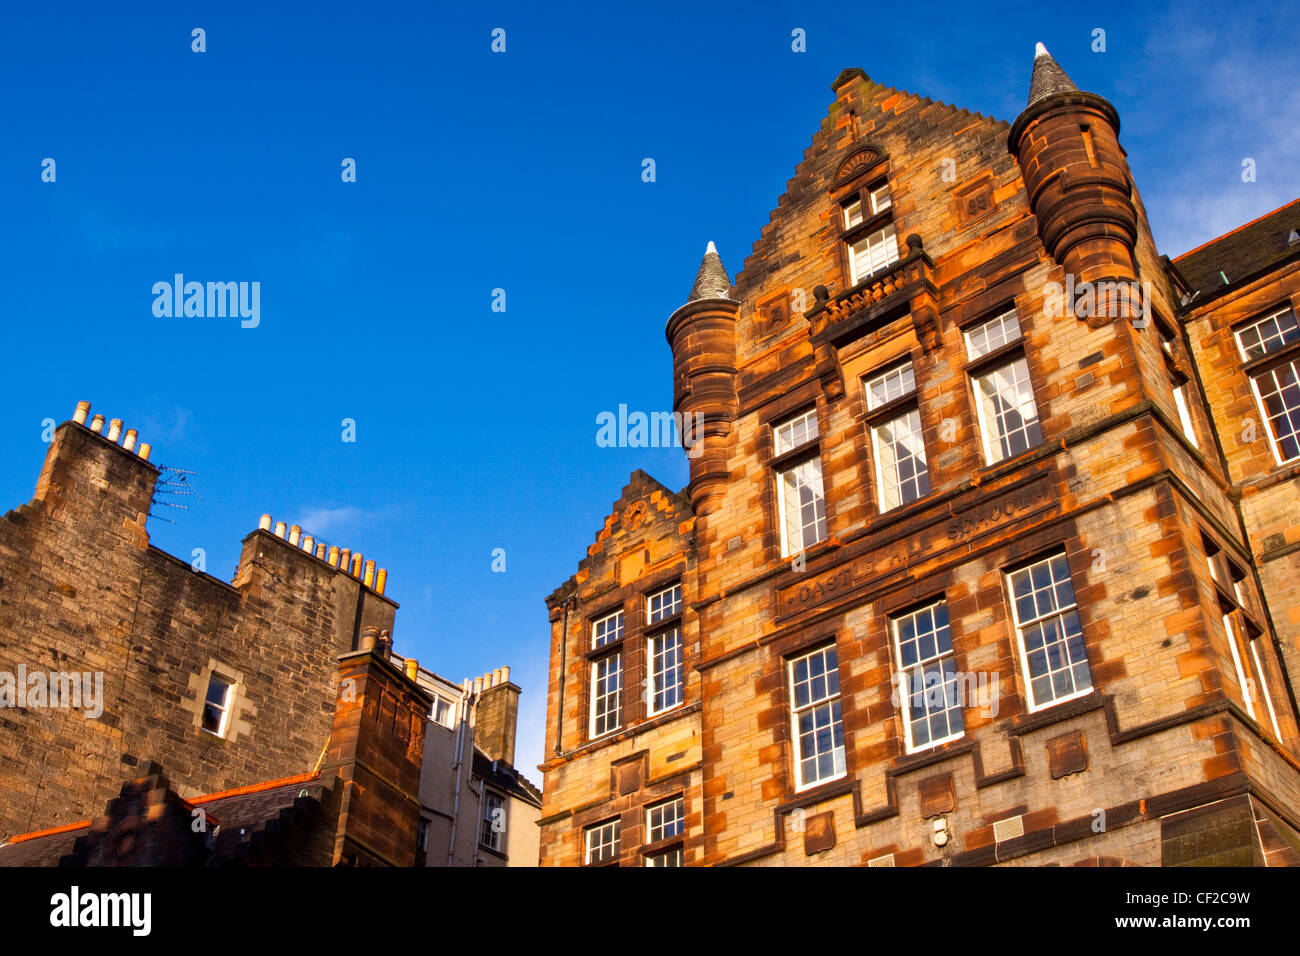 The grand architecture of Castle Hill School, opened in 1889, located on the south side of Castle Hill. Stock Photo